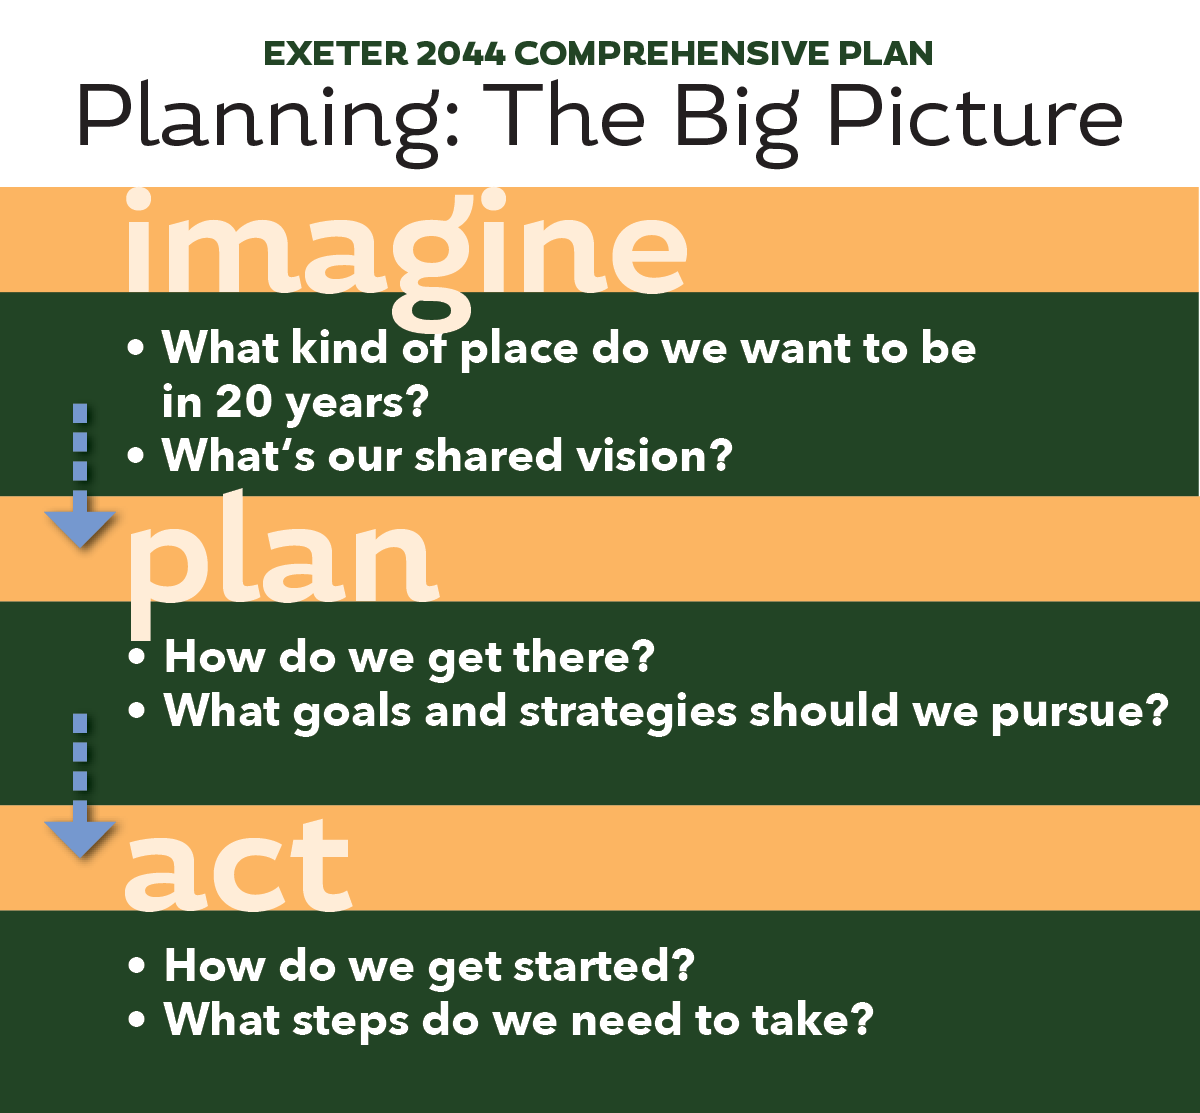 Planing:  The Big Picture